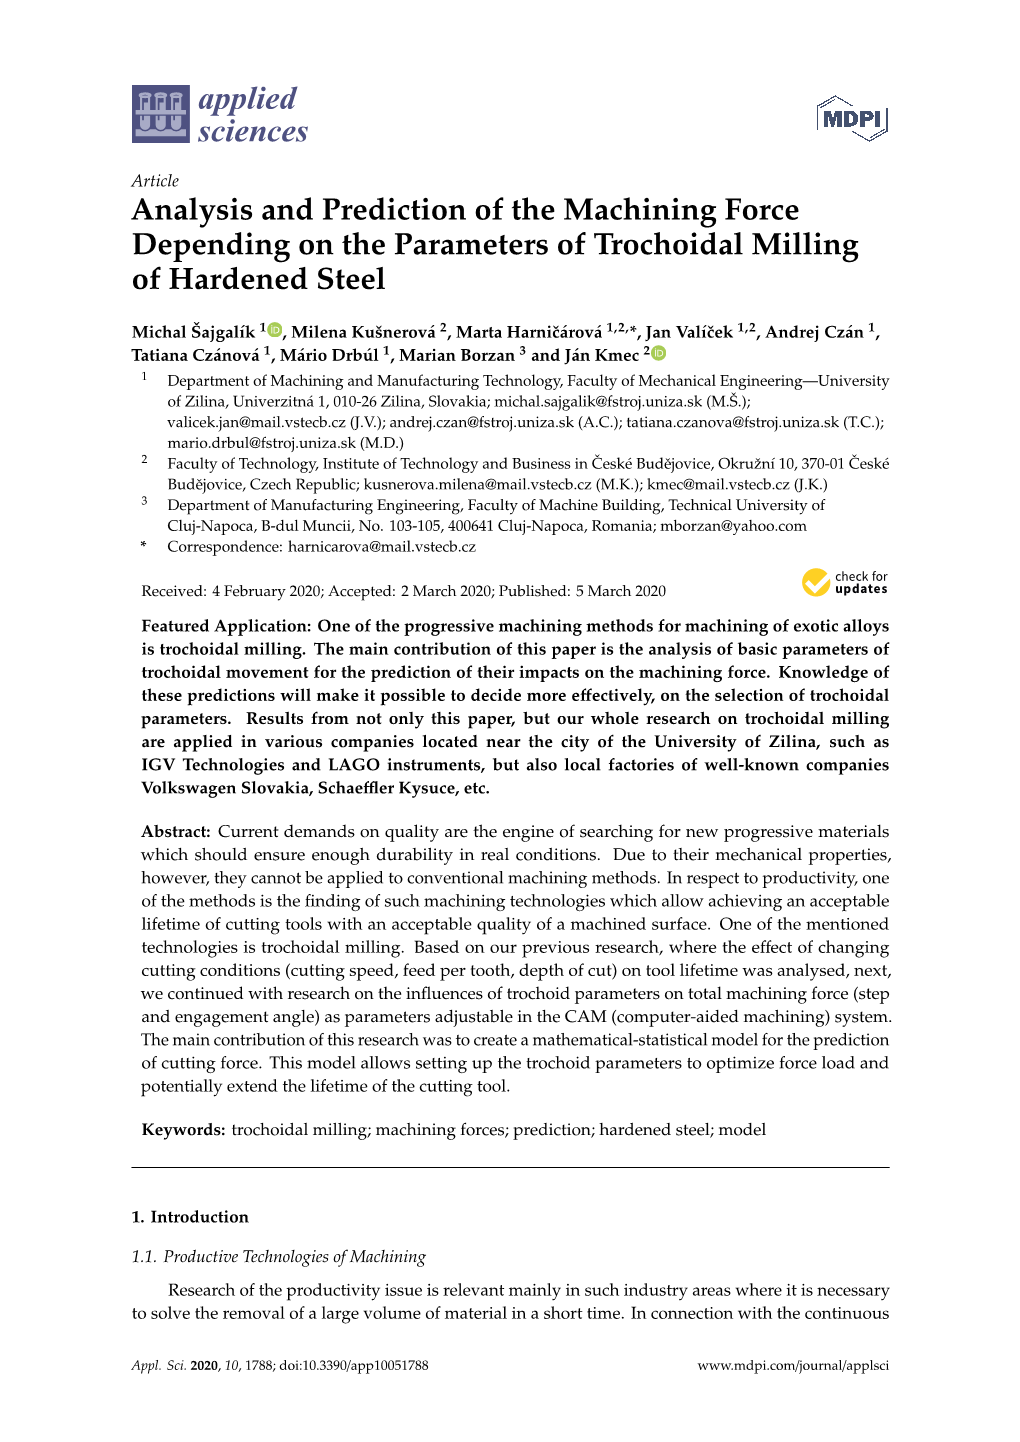 Analysis and Prediction of the Machining Force Depending on the Parameters of Trochoidal Milling of Hardened Steel